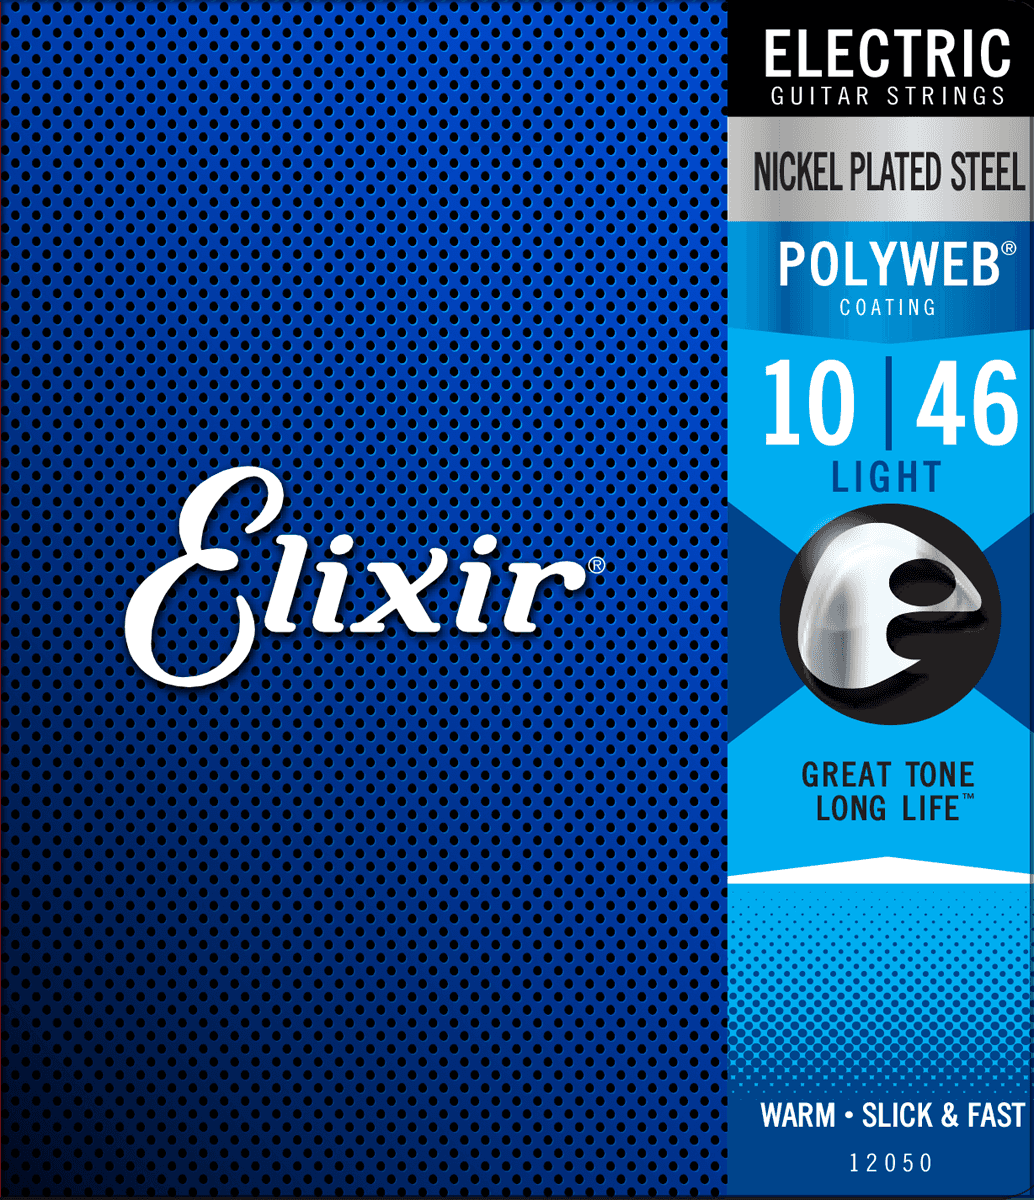 Elixir 12050 Polyweb Nps Round Wound Electric Guitar Light 6c 10-46 - Electric guitar strings - Main picture